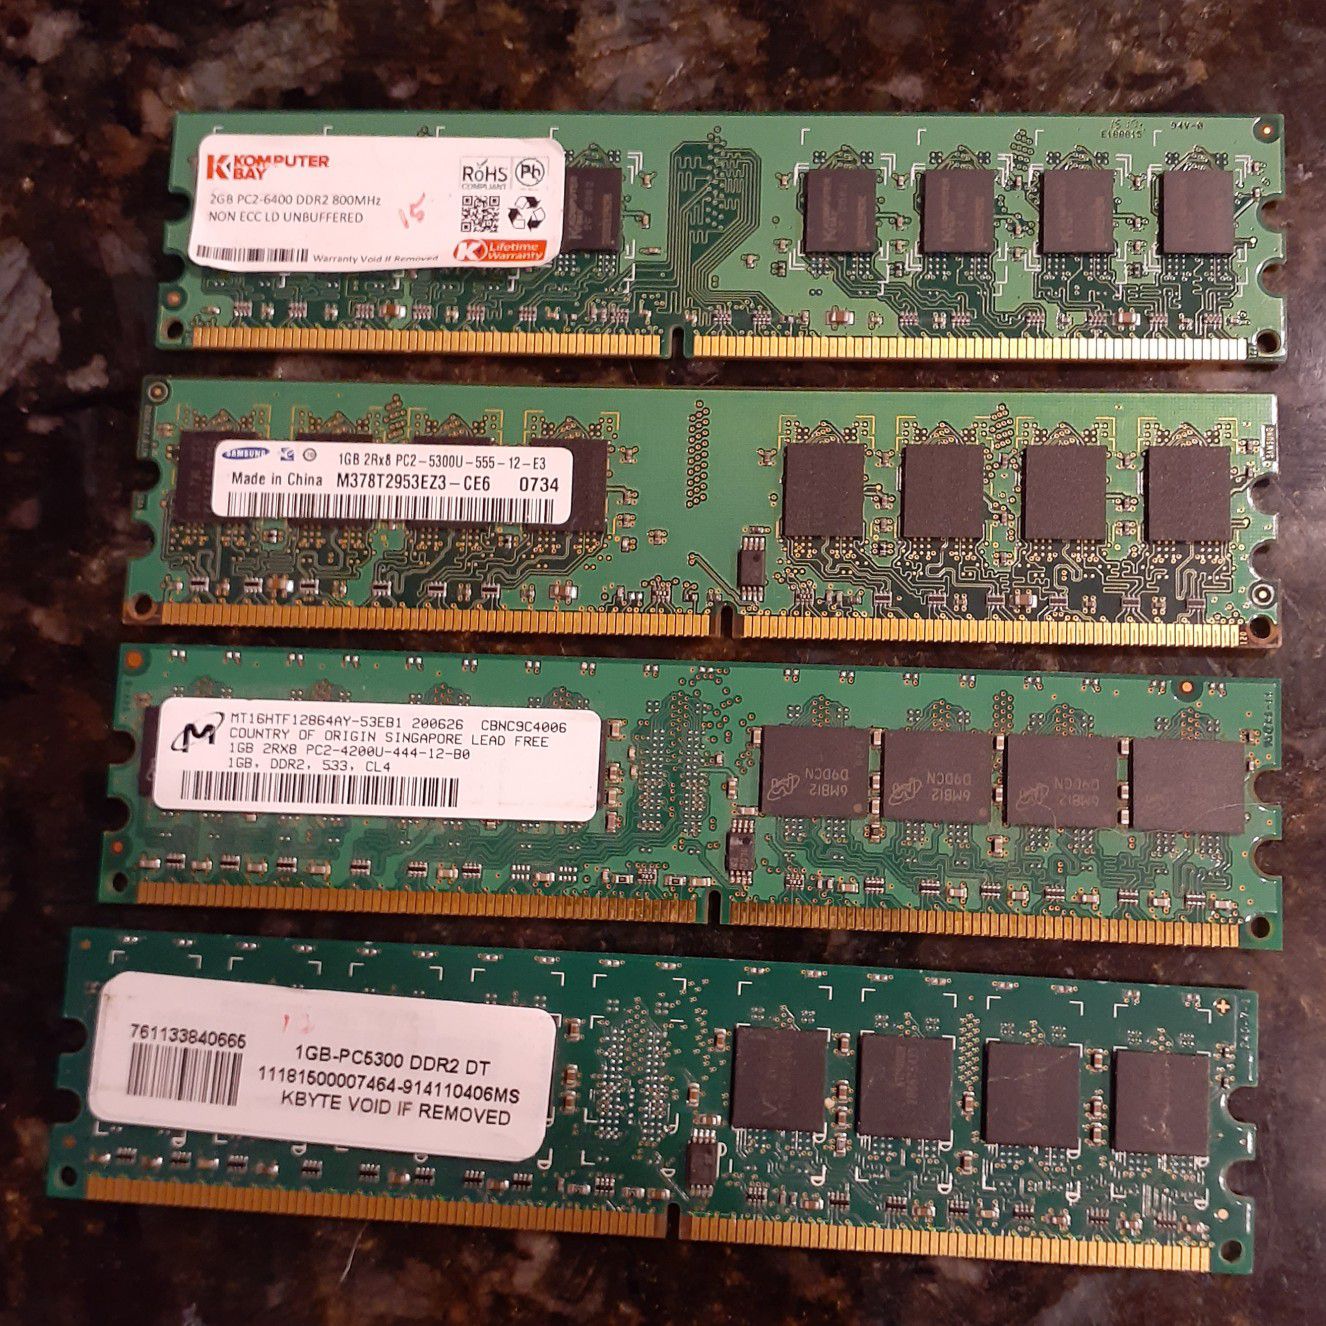 DDR2 Desktop Ram 3x 1GB 1x 2GB total of 5 GB First come first served. 19$ OBO